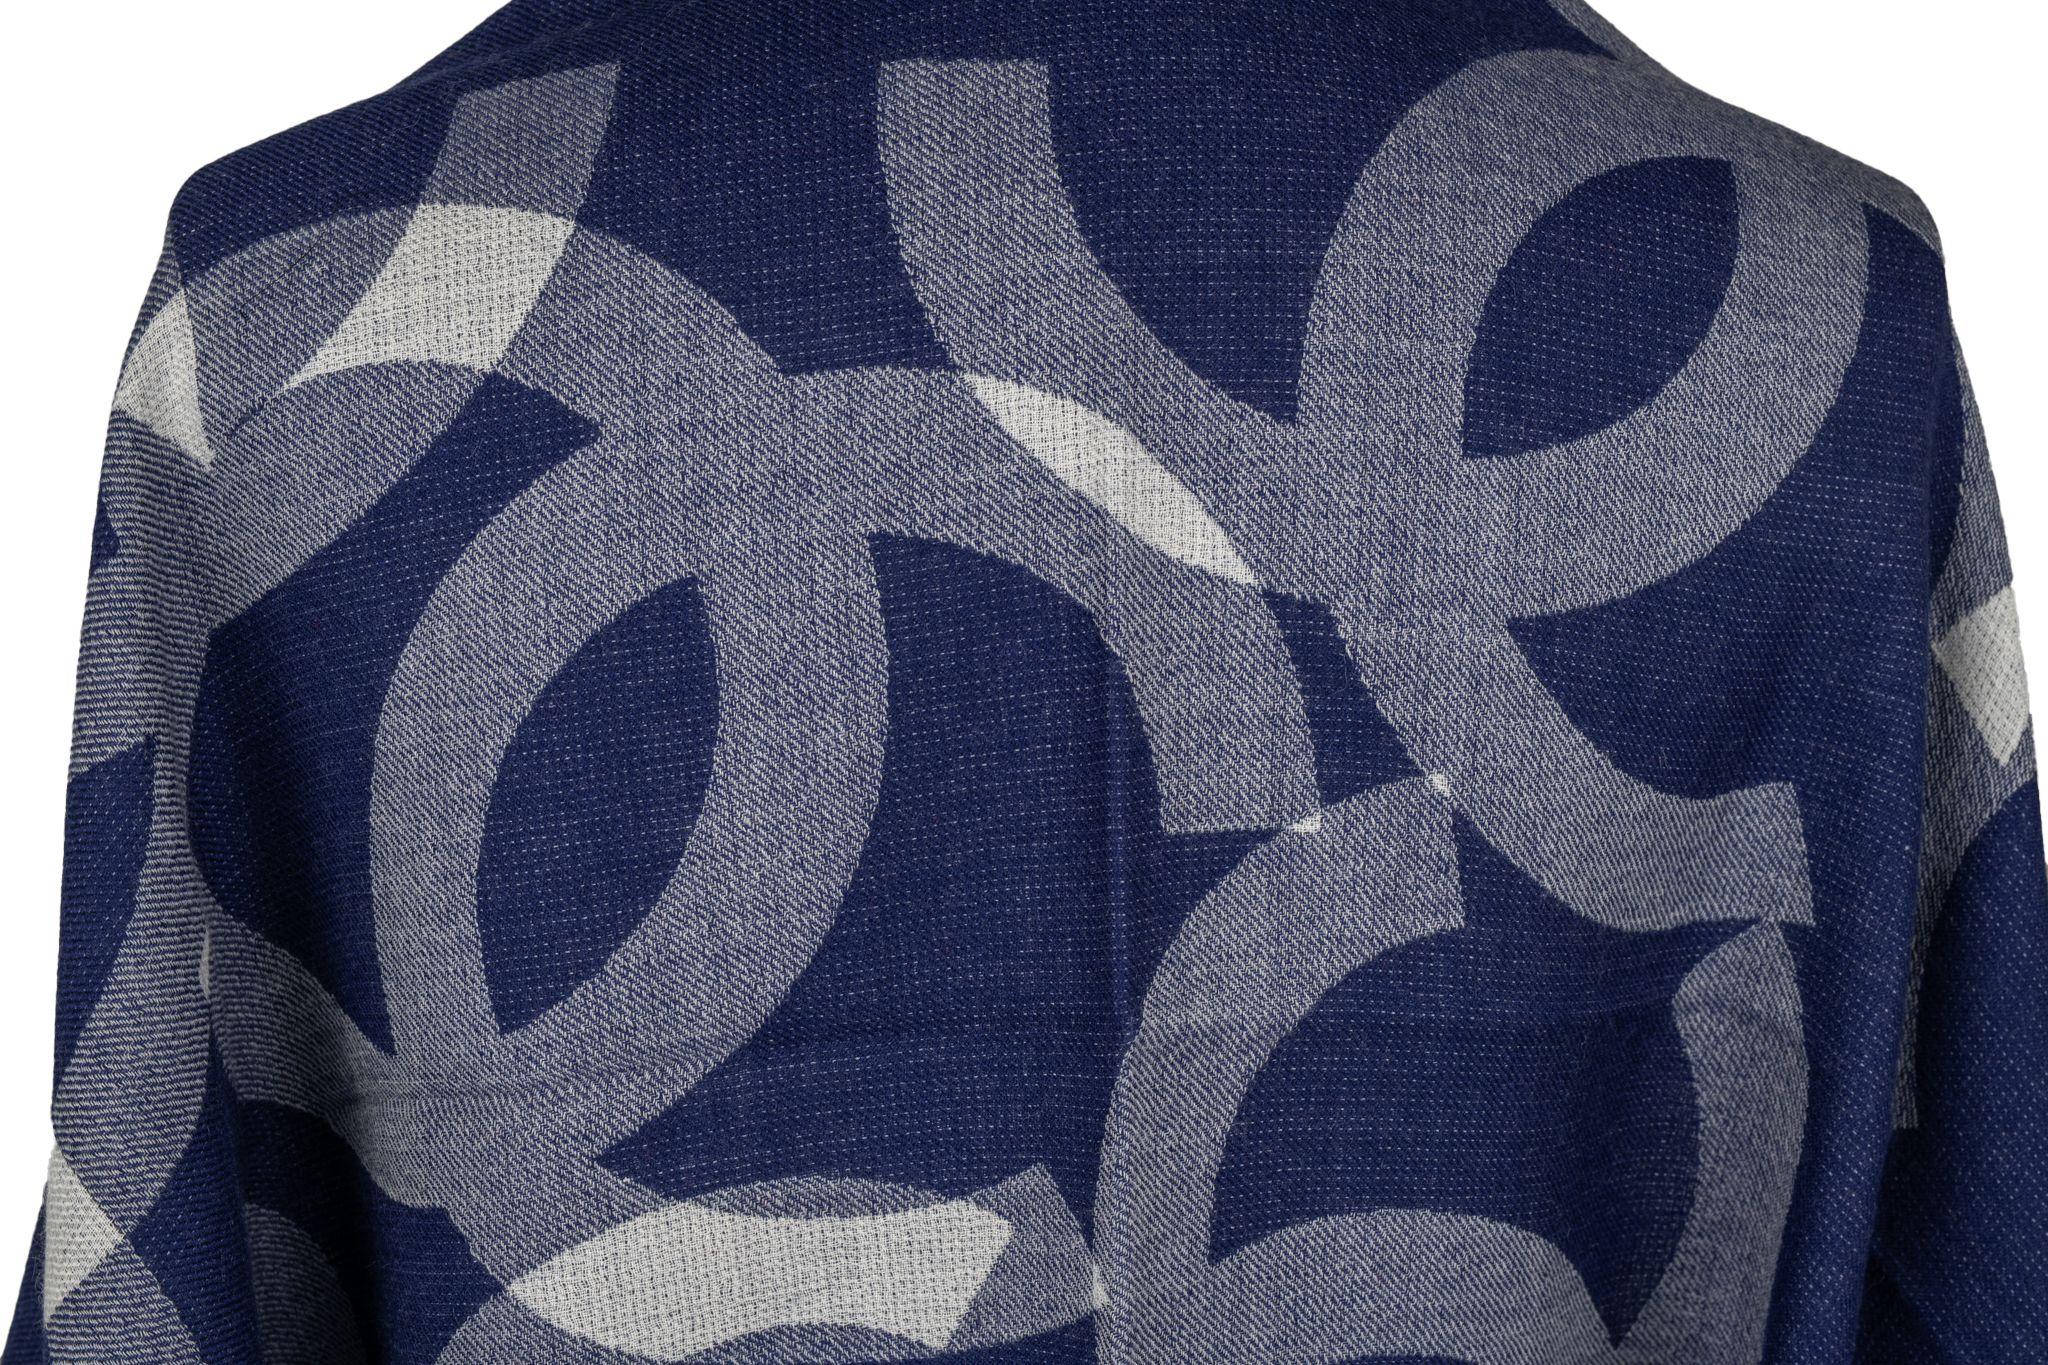 Chanel New Cashmere Shawl Navy In New Condition For Sale In West Hollywood, CA